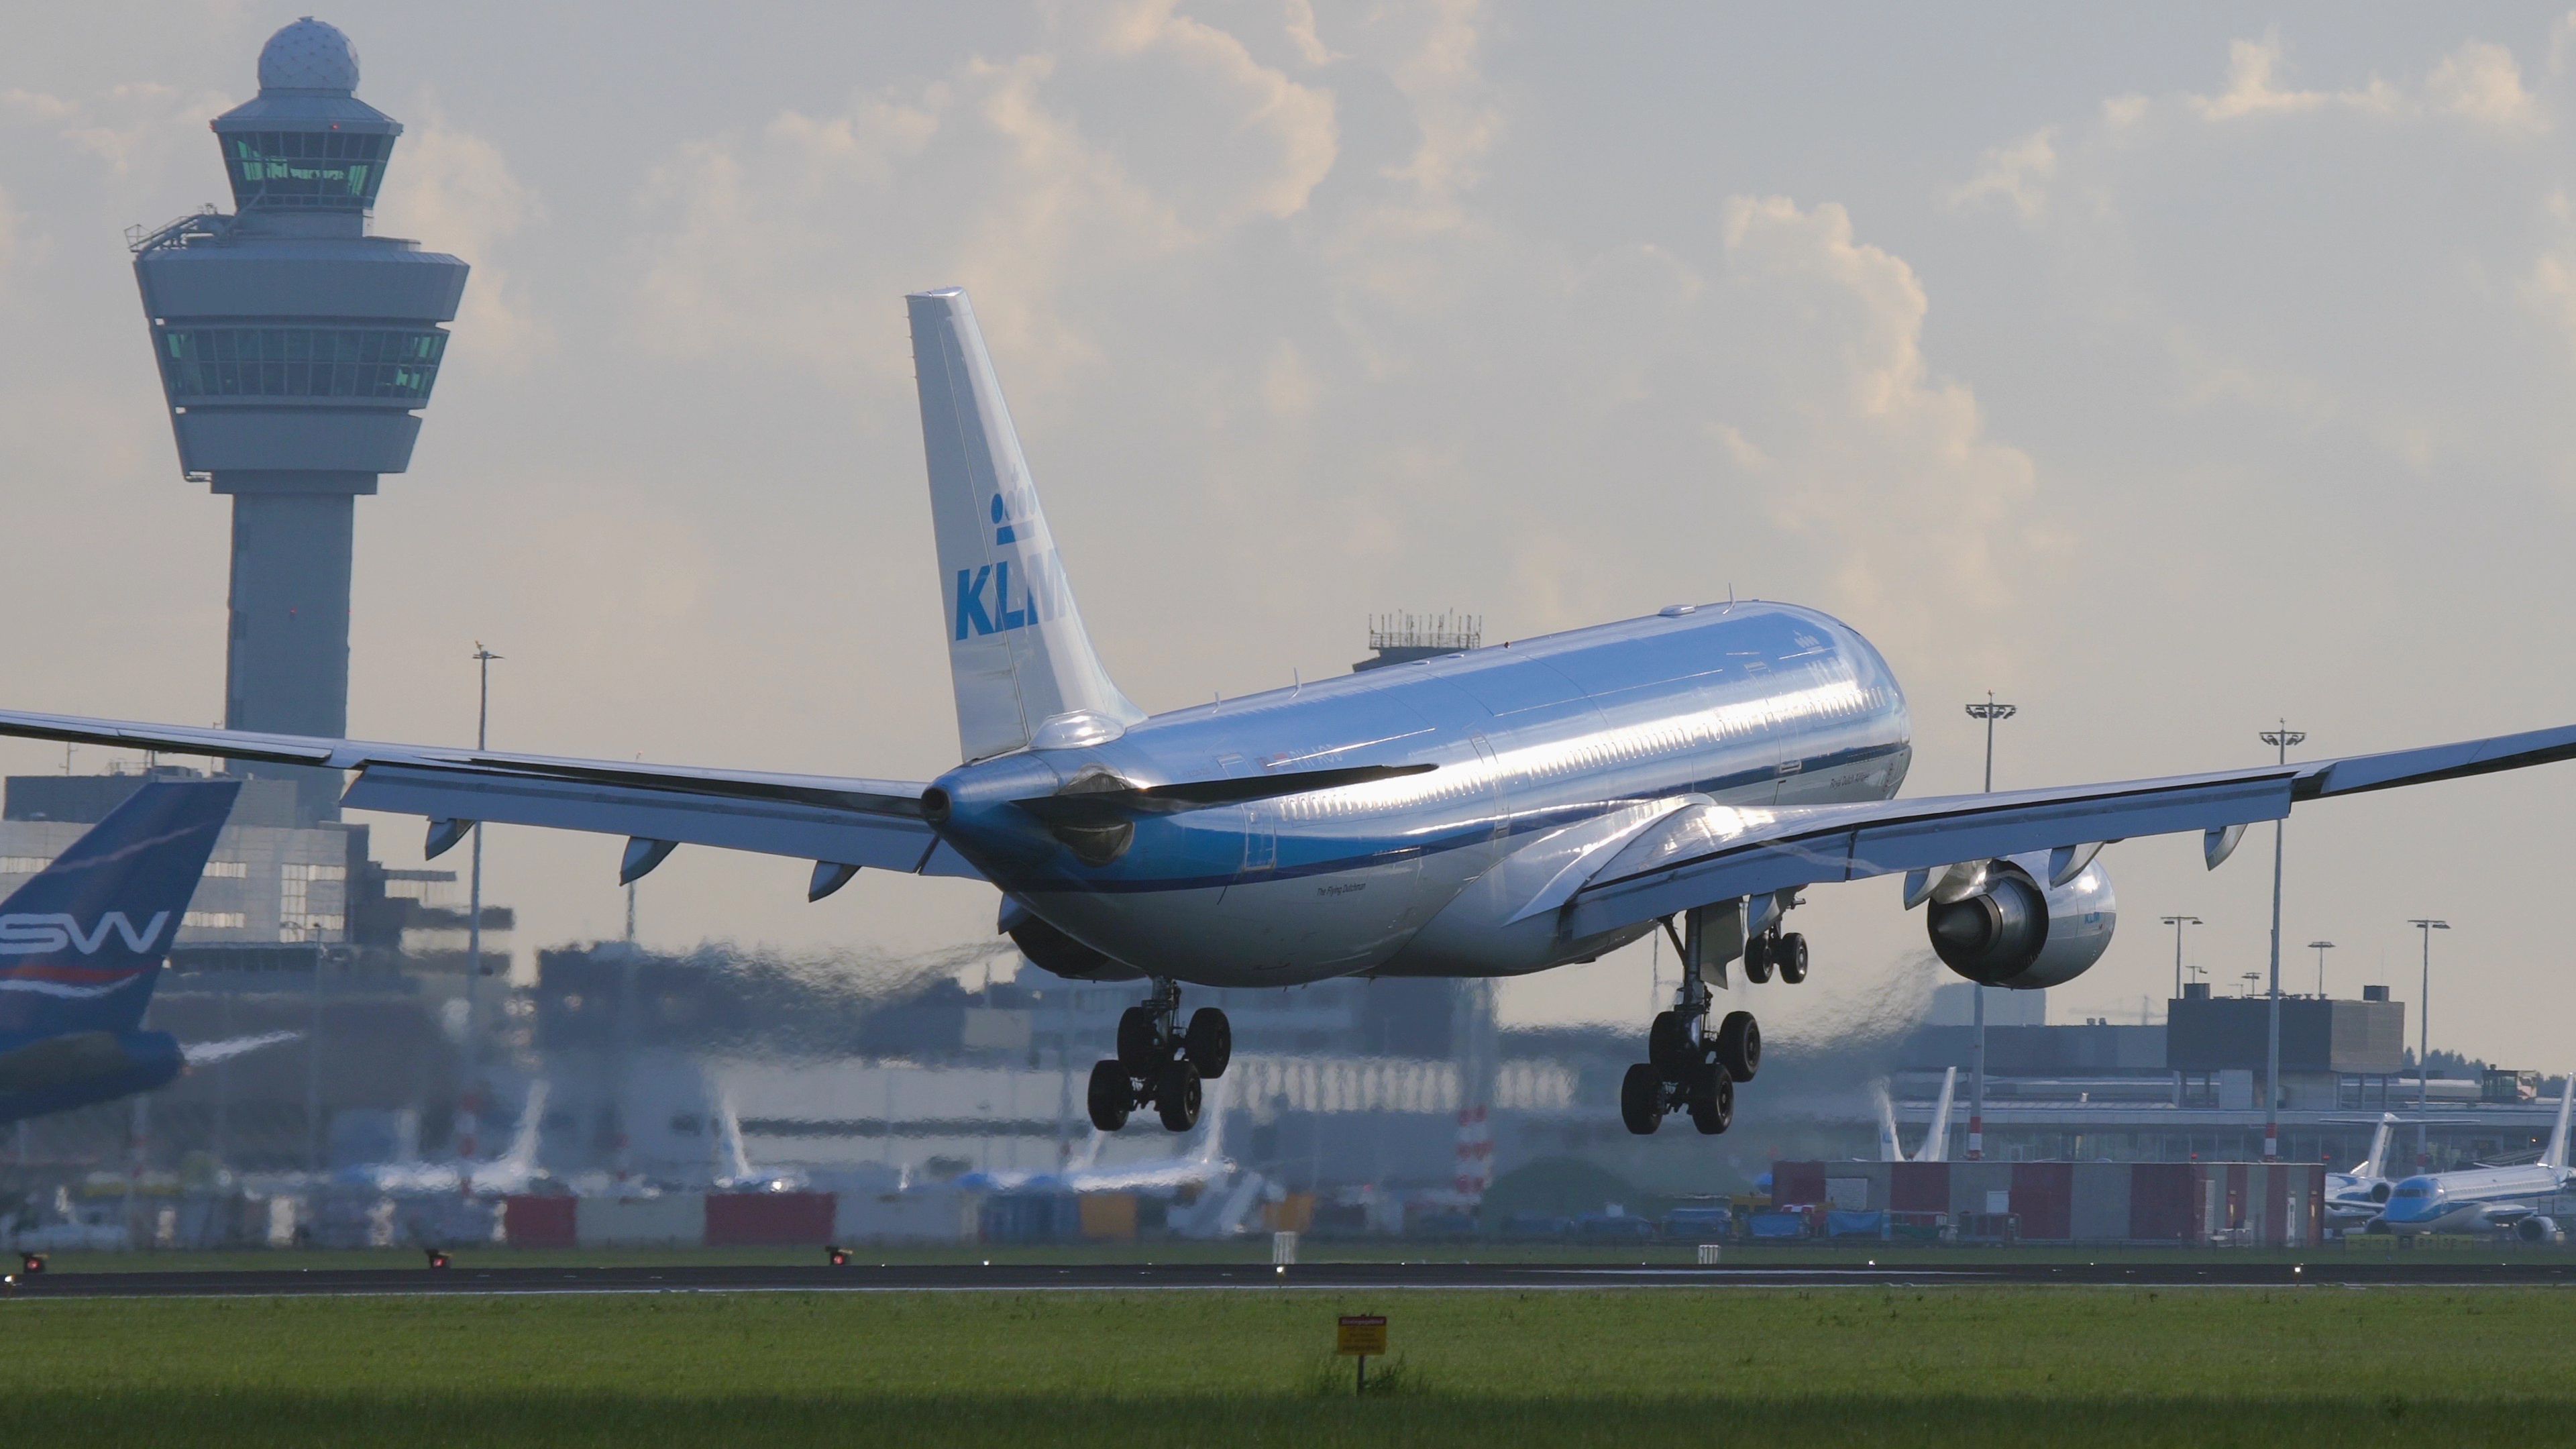 A KLM Airbus A330-200 about to land at Amsterdam Schiphol Airport.